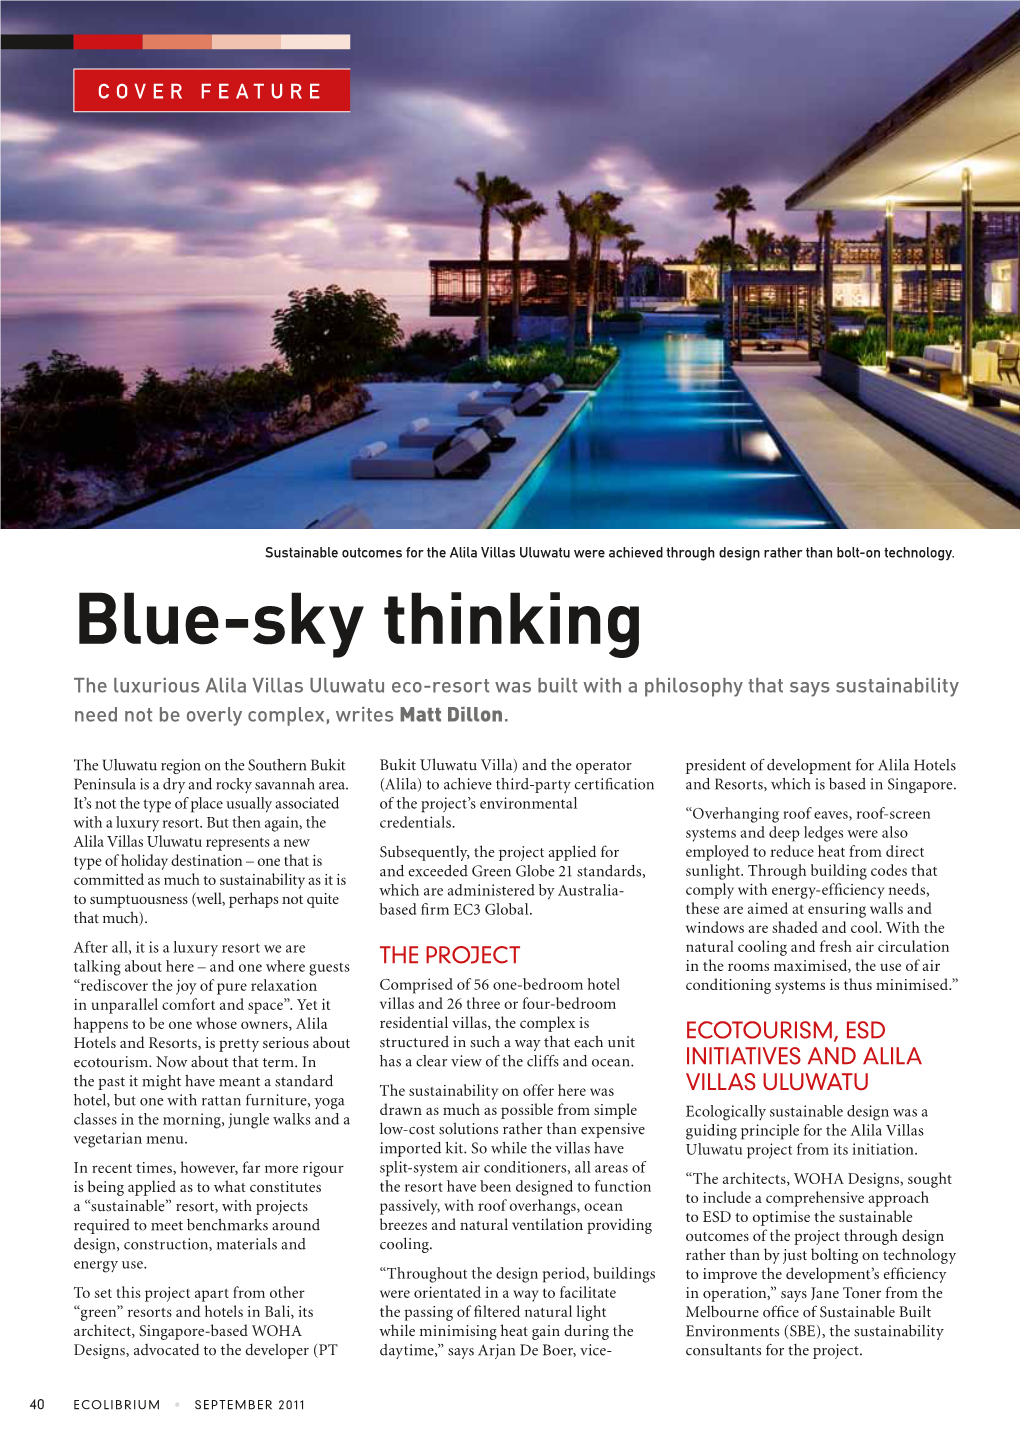 Blue-Sky Thinking the Luxurious Alila Villas Uluwatu Eco-Resort Was Built with a Philosophy That Says Sustainability Need Not Be Overly Complex, Writes Matt Dillon